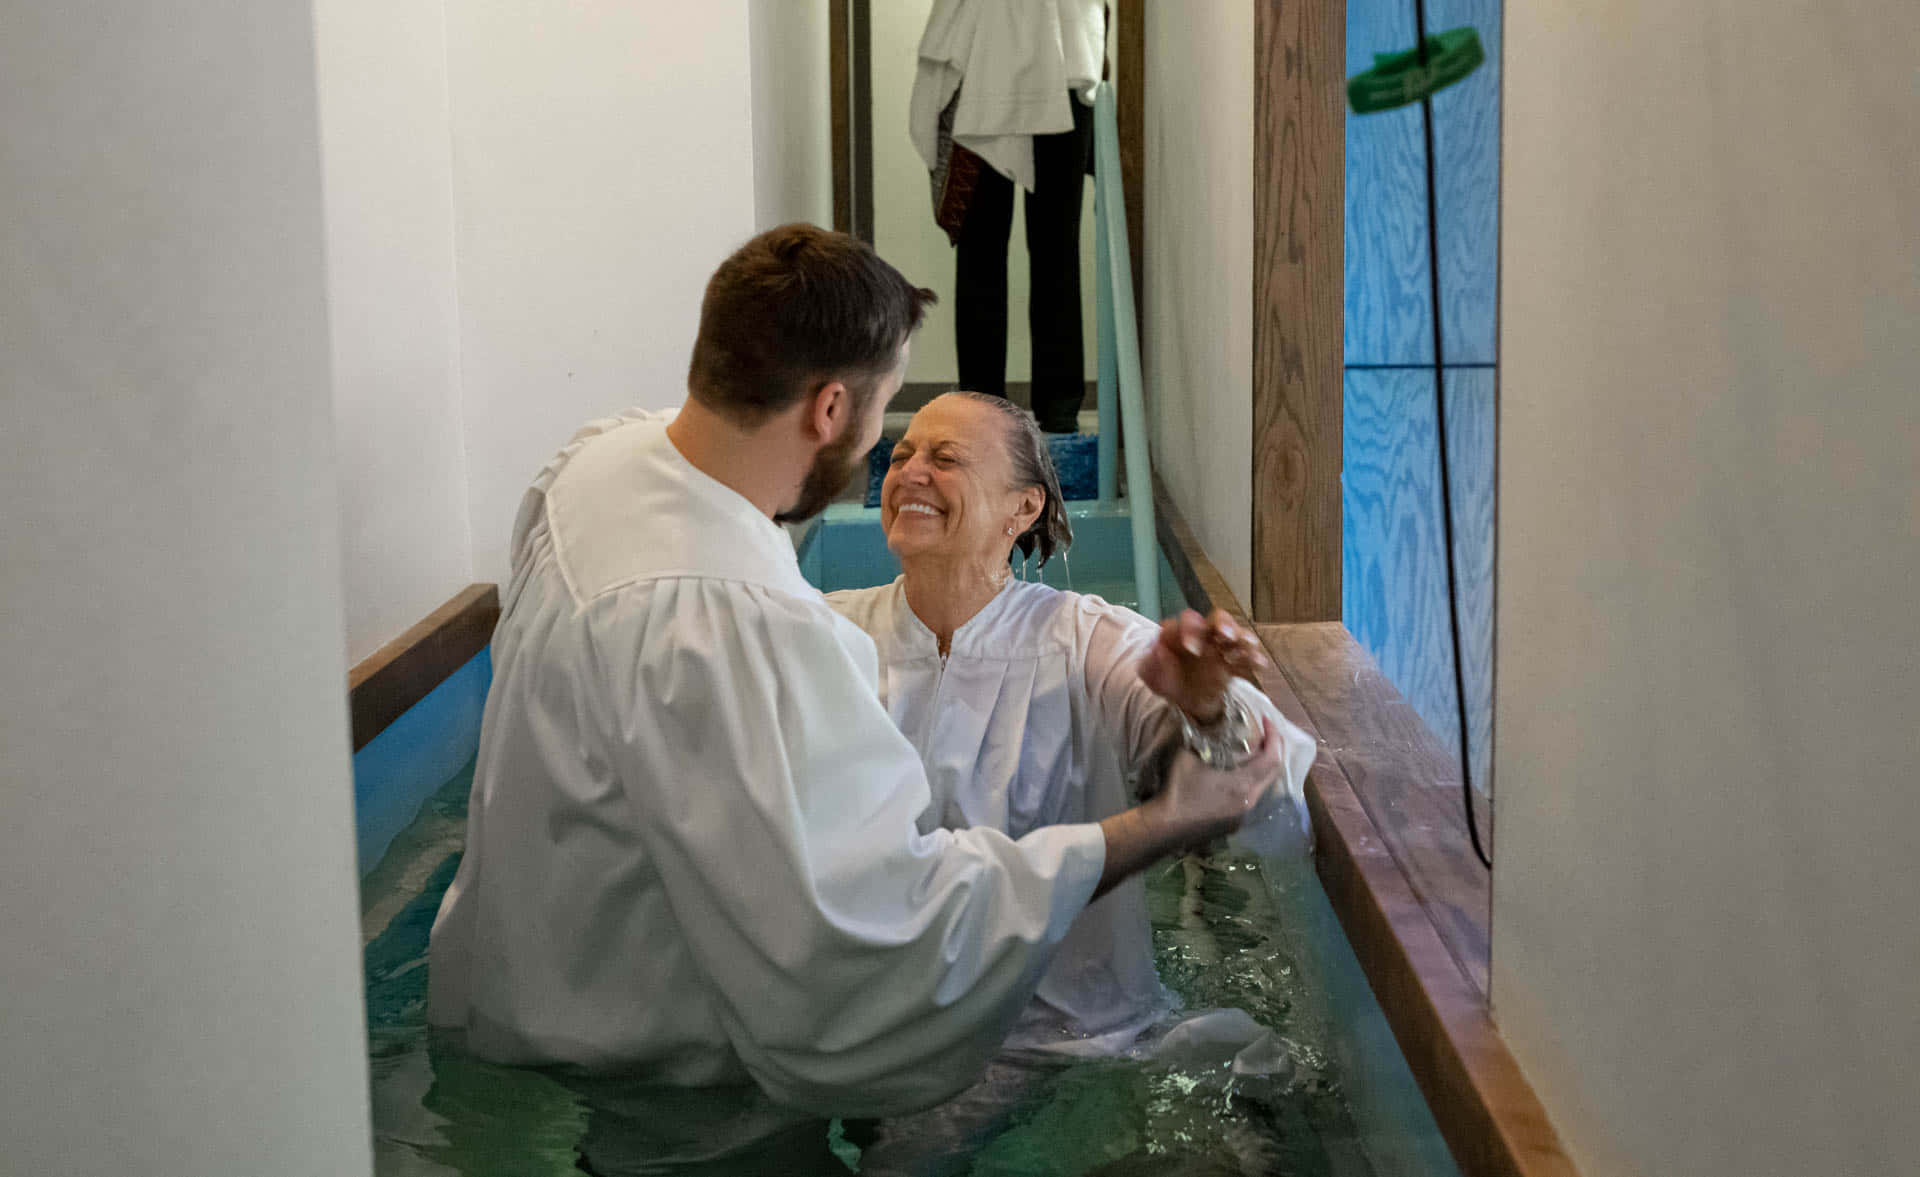 “Find Strength in Faith: Join us in the Celebration of Baptism”